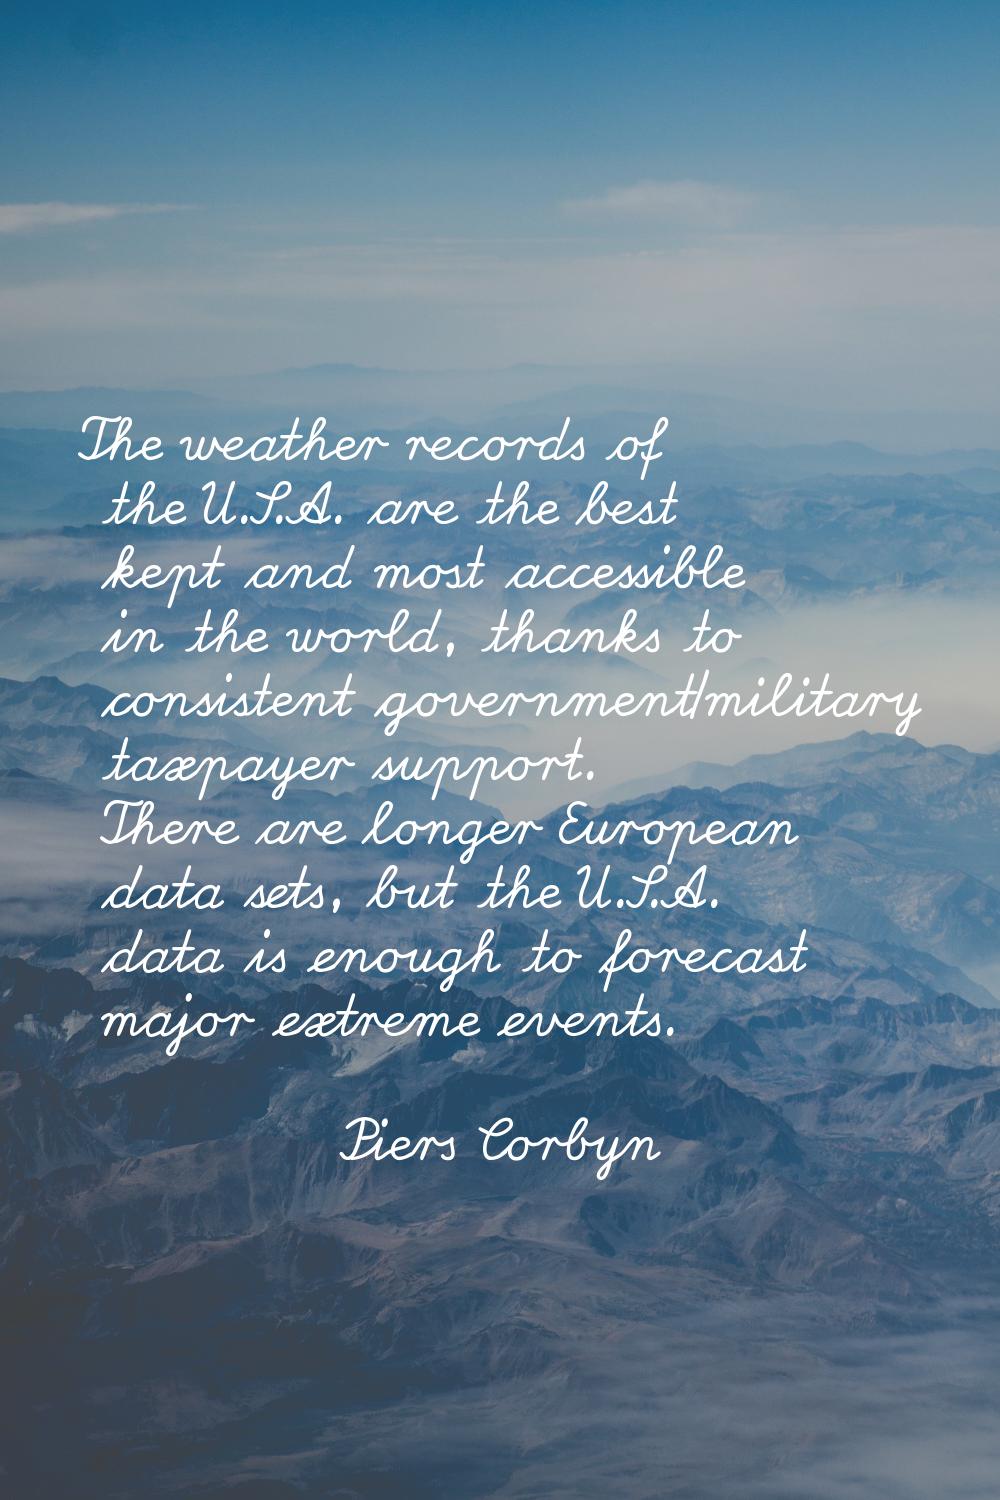 The weather records of the U.S.A. are the best kept and most accessible in the world, thanks to con